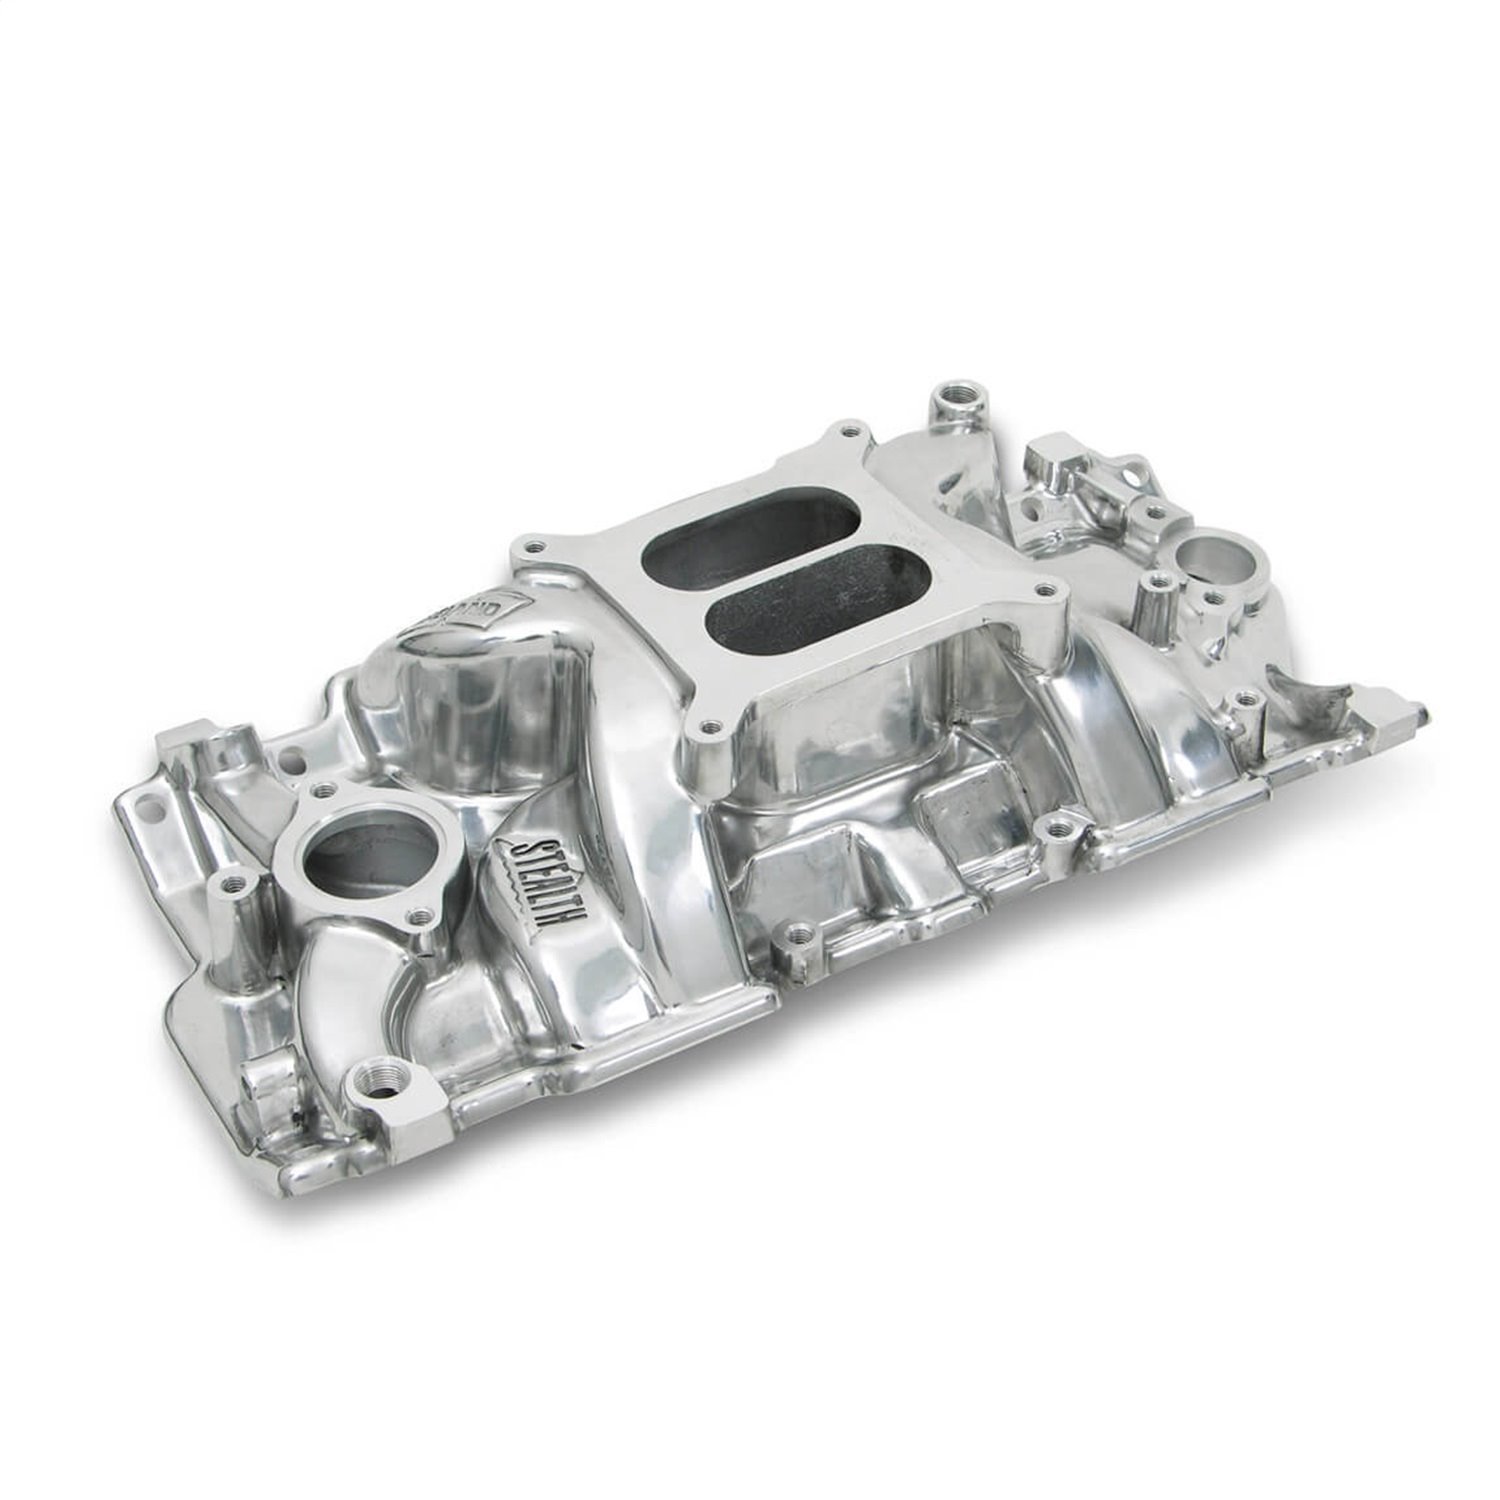 Speed Warrior Intake Manifold 1987-95 Chevy 262-400 with